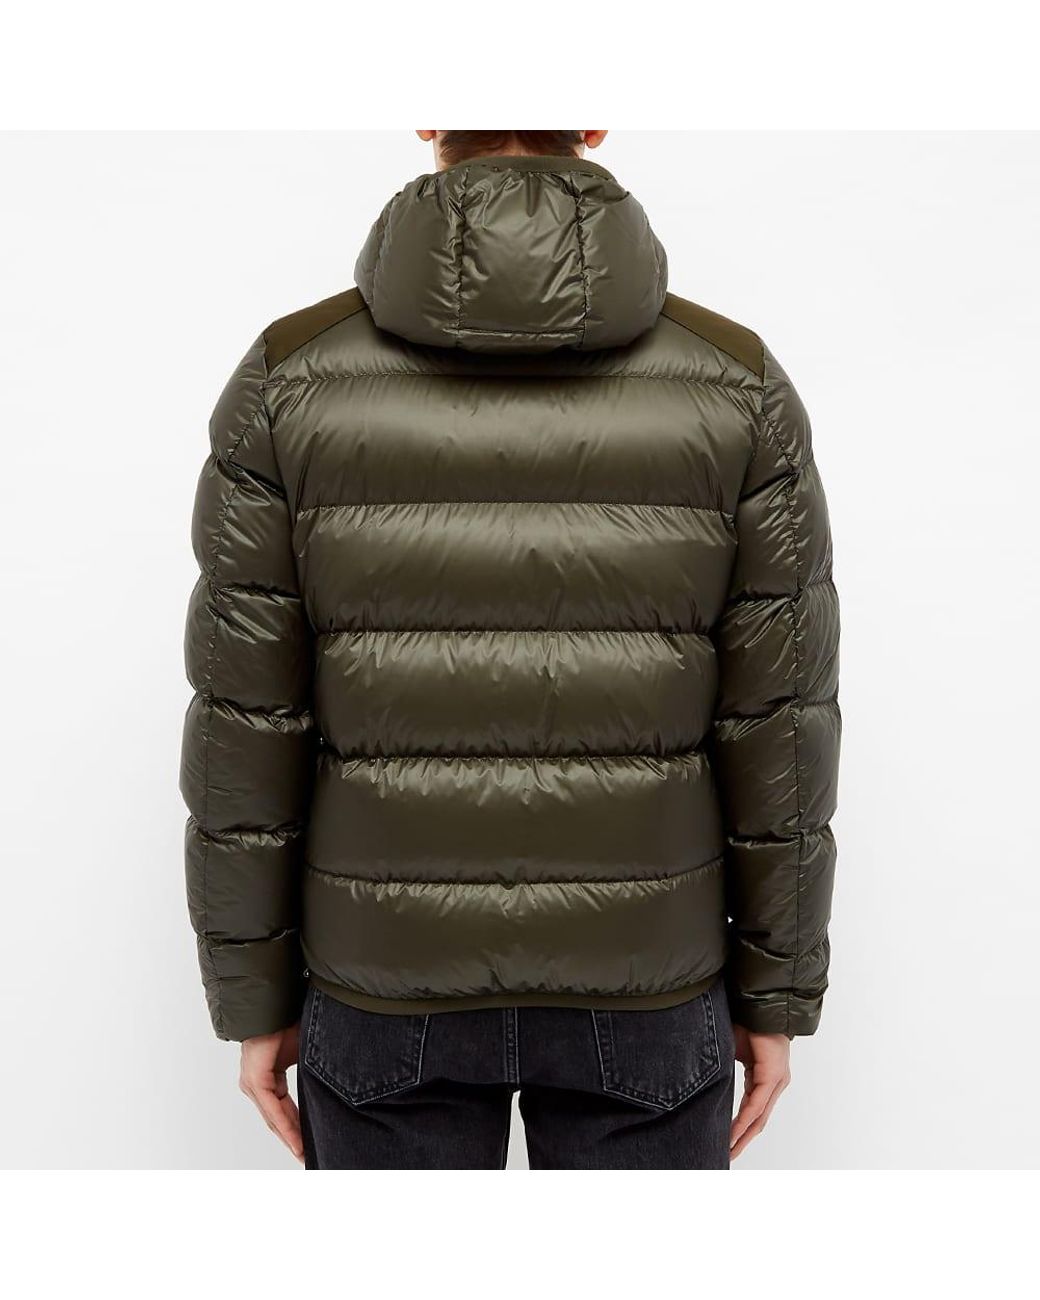 3 MONCLER GRENOBLE Synthetic Hintertux Hooded Down Ski Jacket in Khaki  (Green) for Men - Save 46% | Lyst